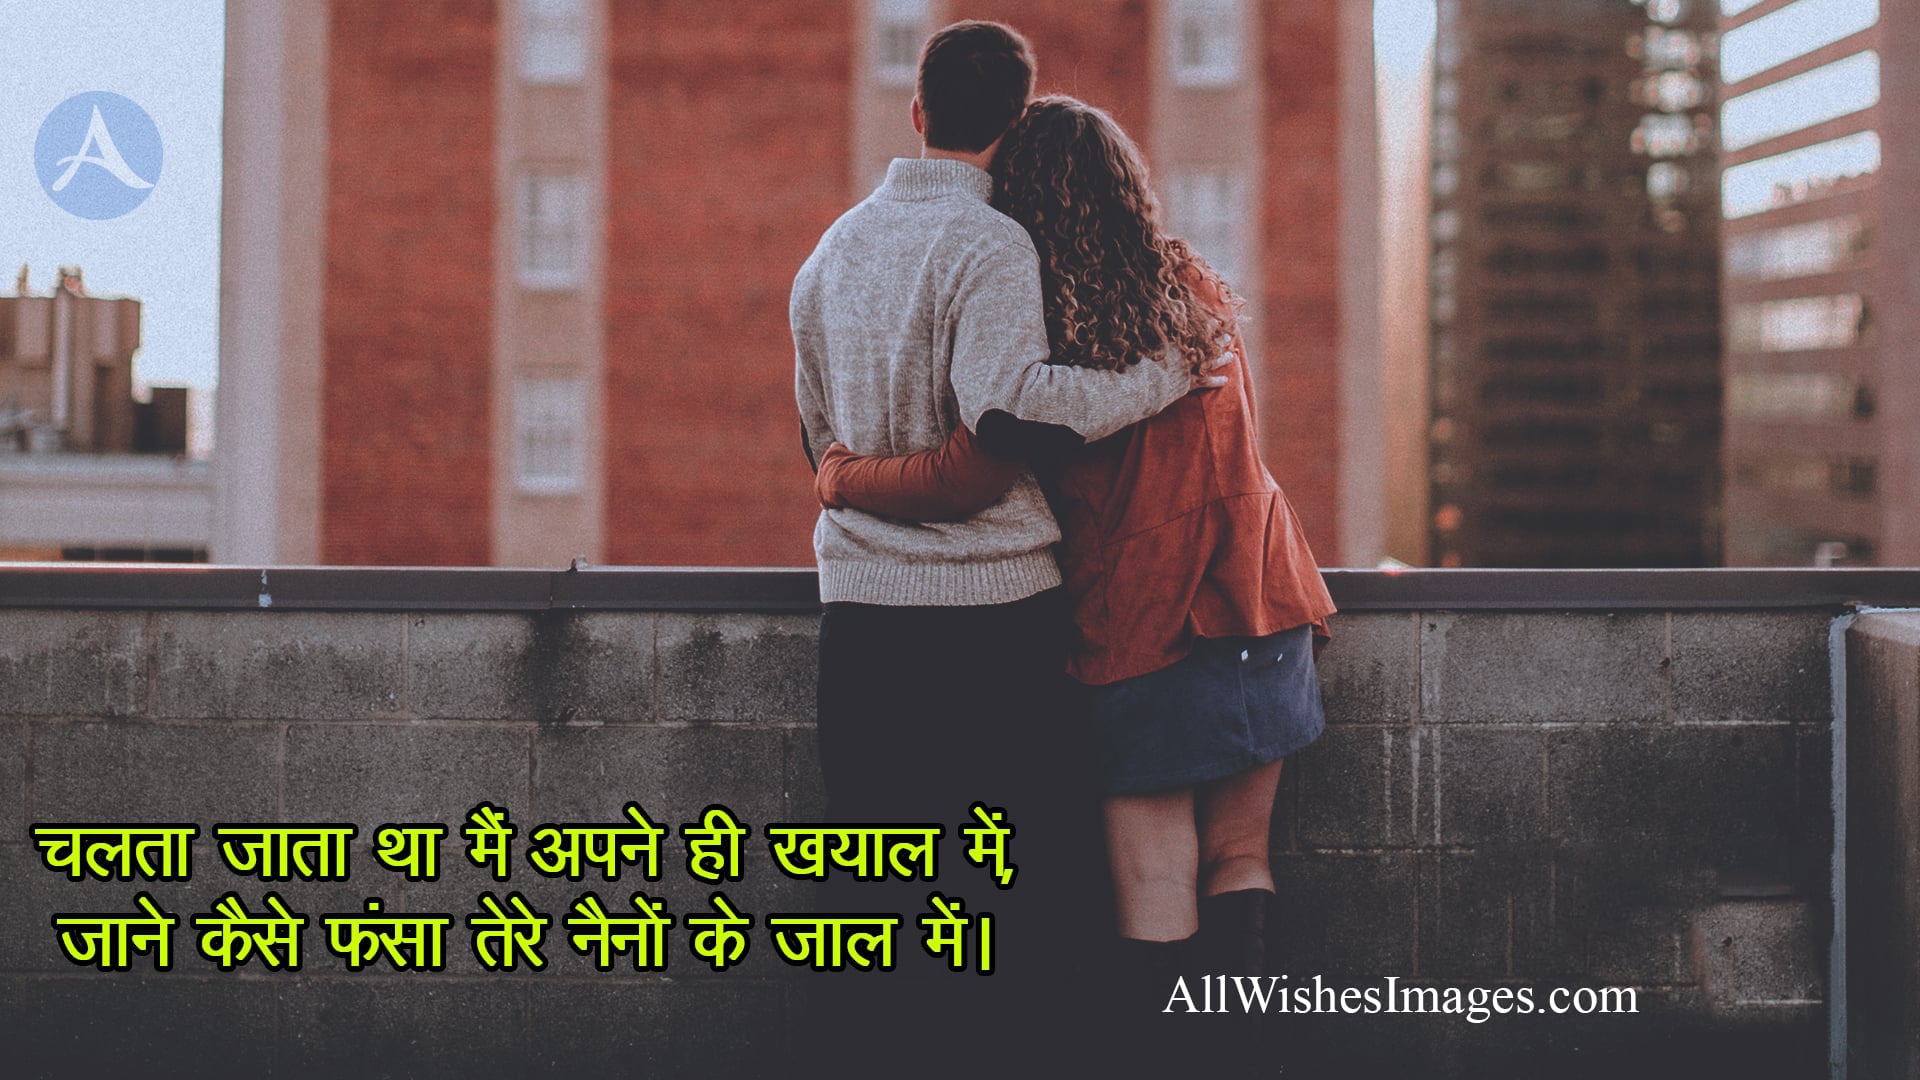 Best dating relationship love quotes in hindi with images 2022